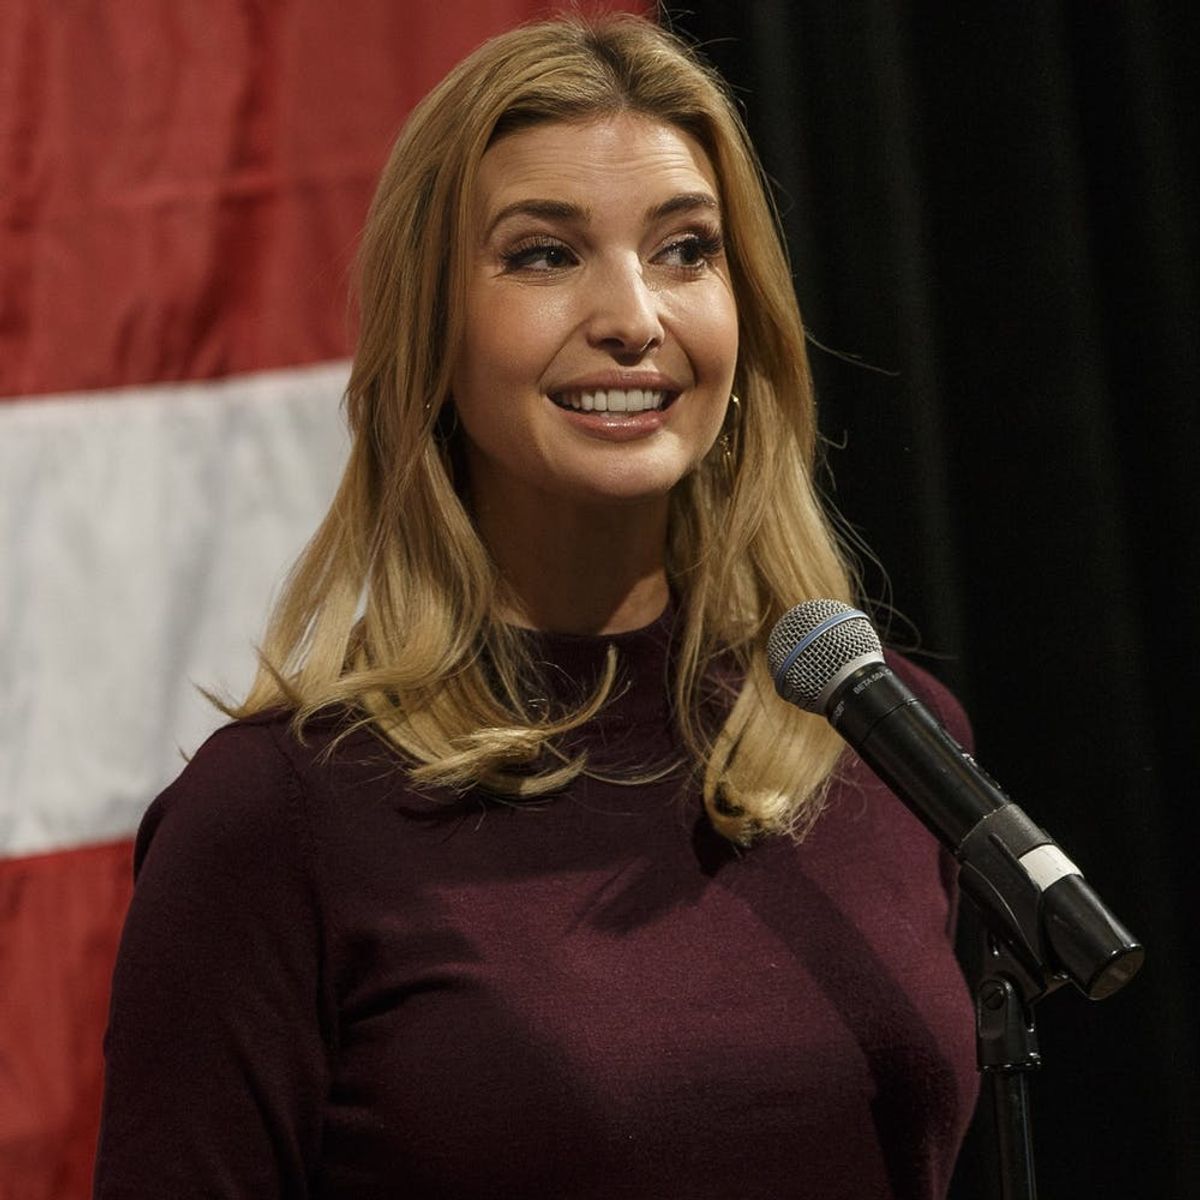 This Ivanka Trump Product Is Flying Off the Shelves in Response to Store Boycotts